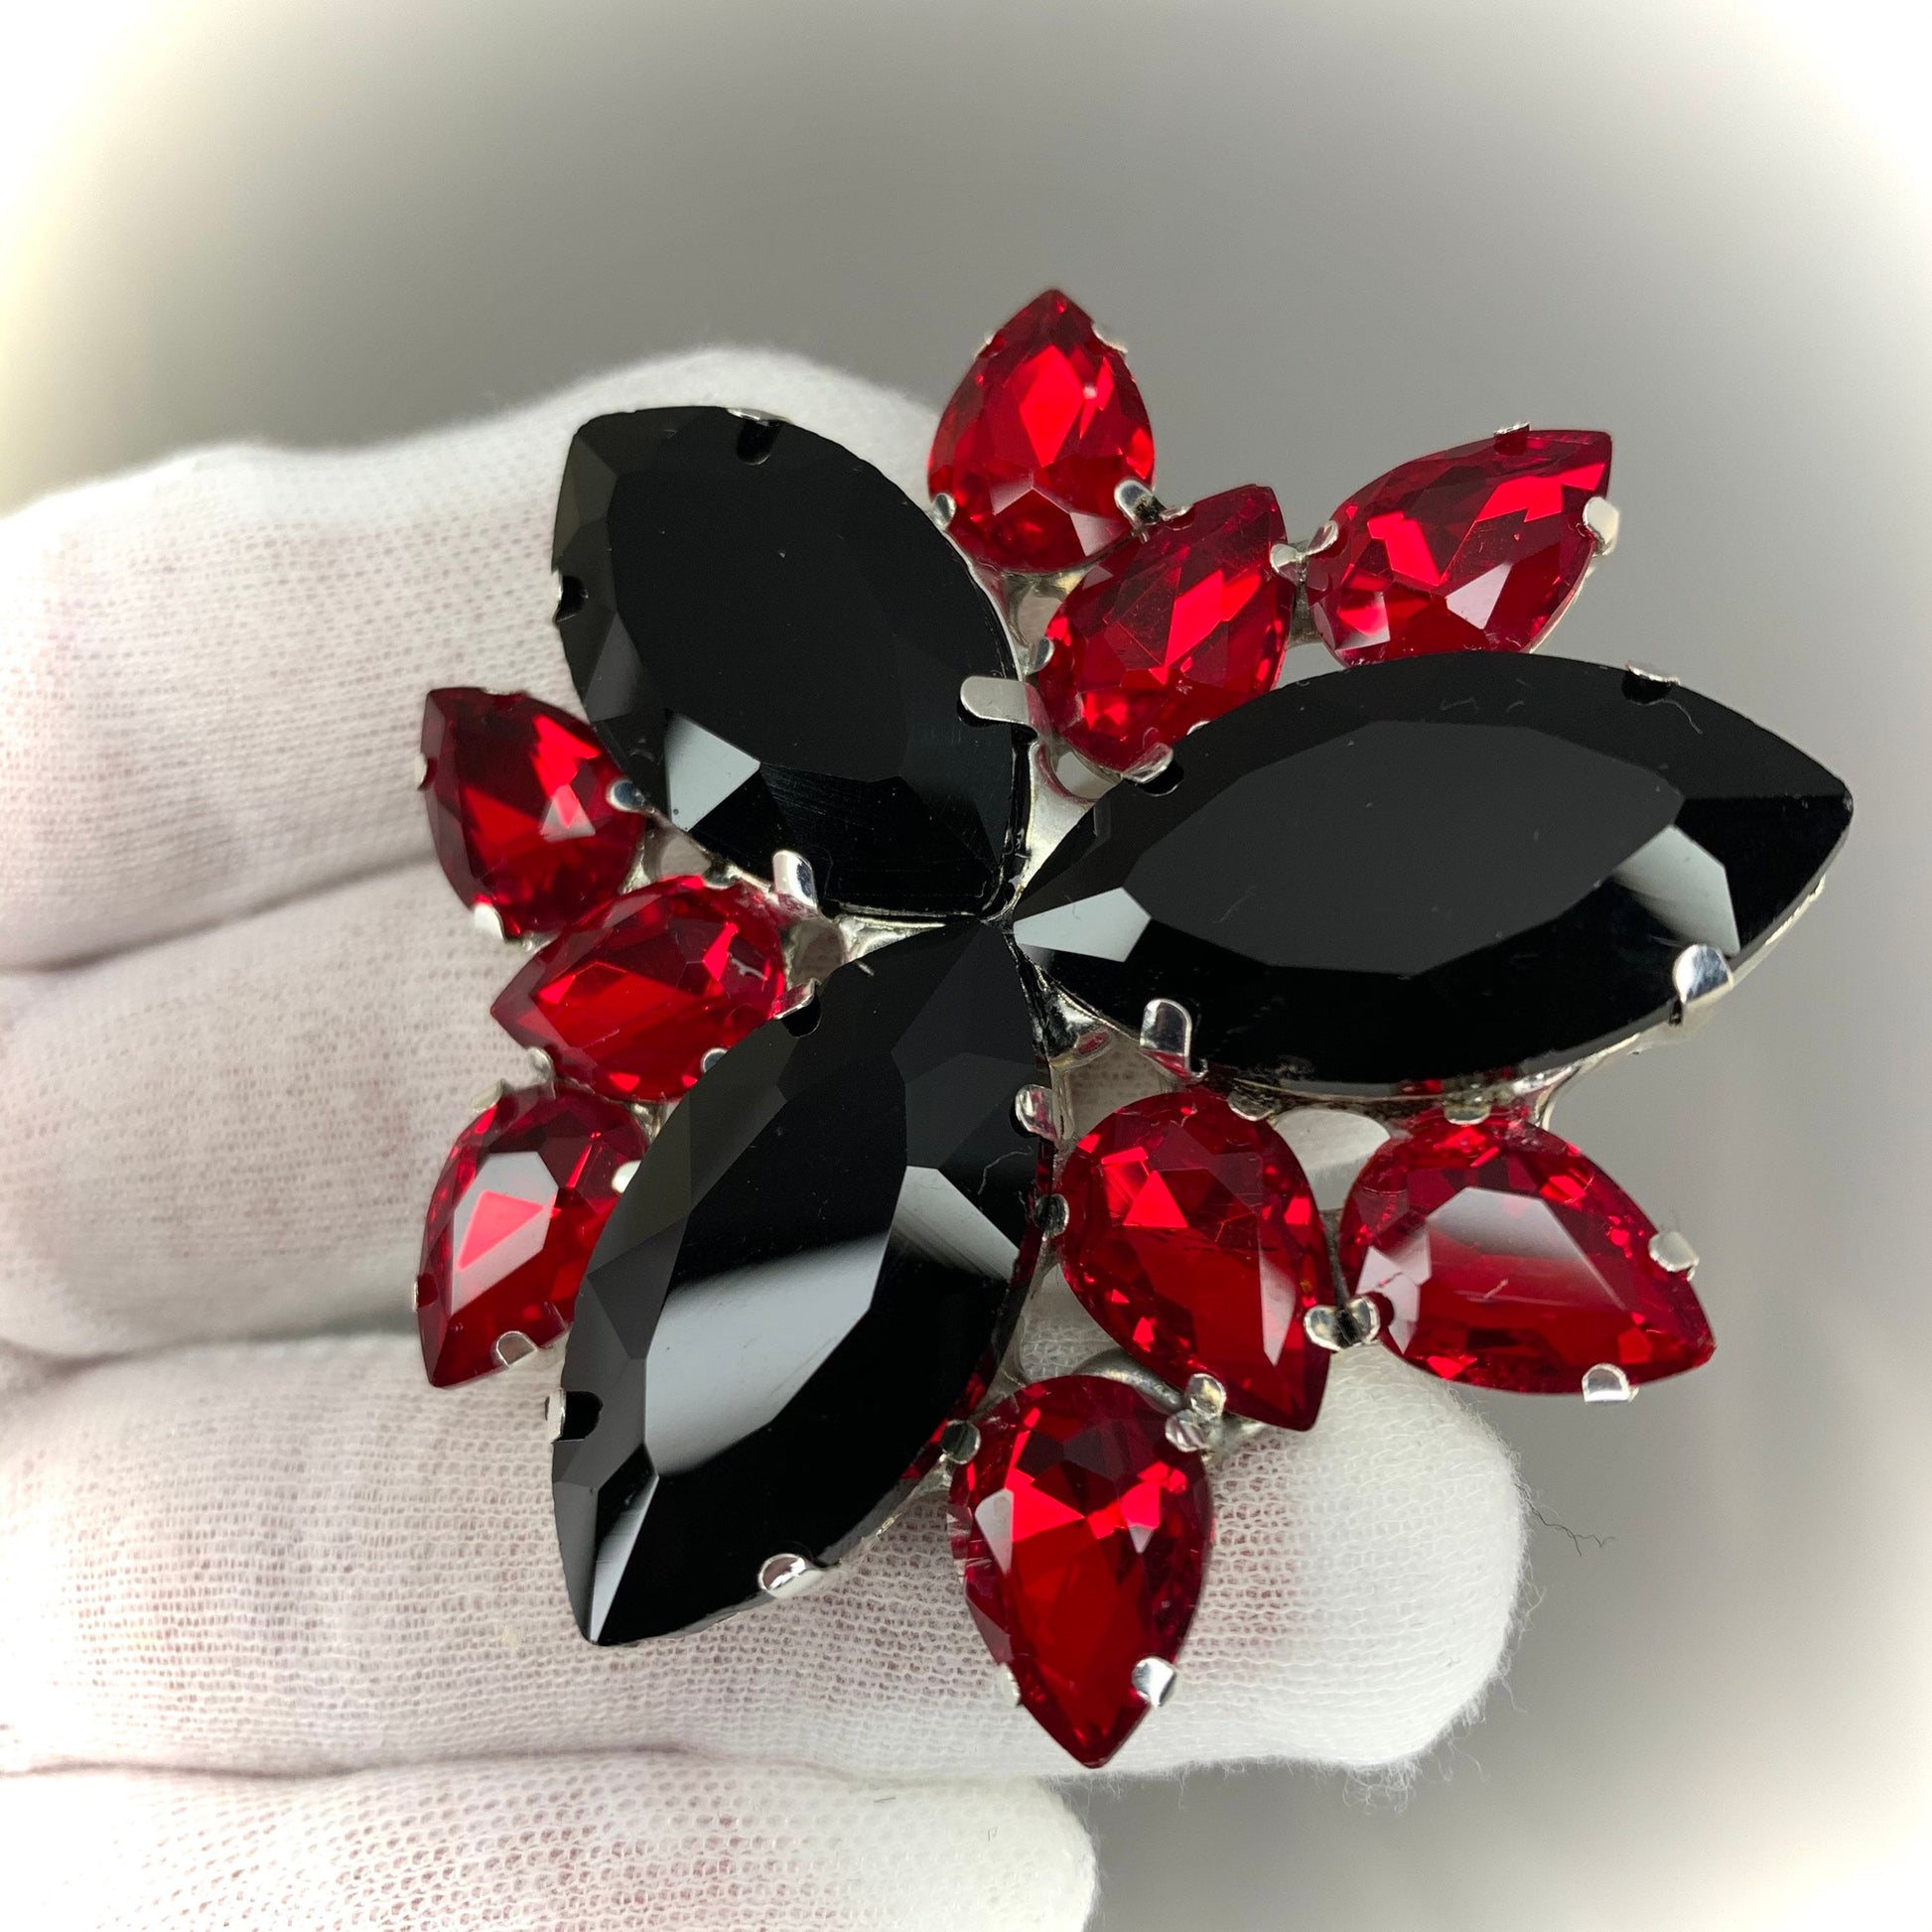 Blood Red & Black Ring / Cocktail Dress Ring / Adjustable back / Gift / Drag Queen Ring /Costume Jewellery